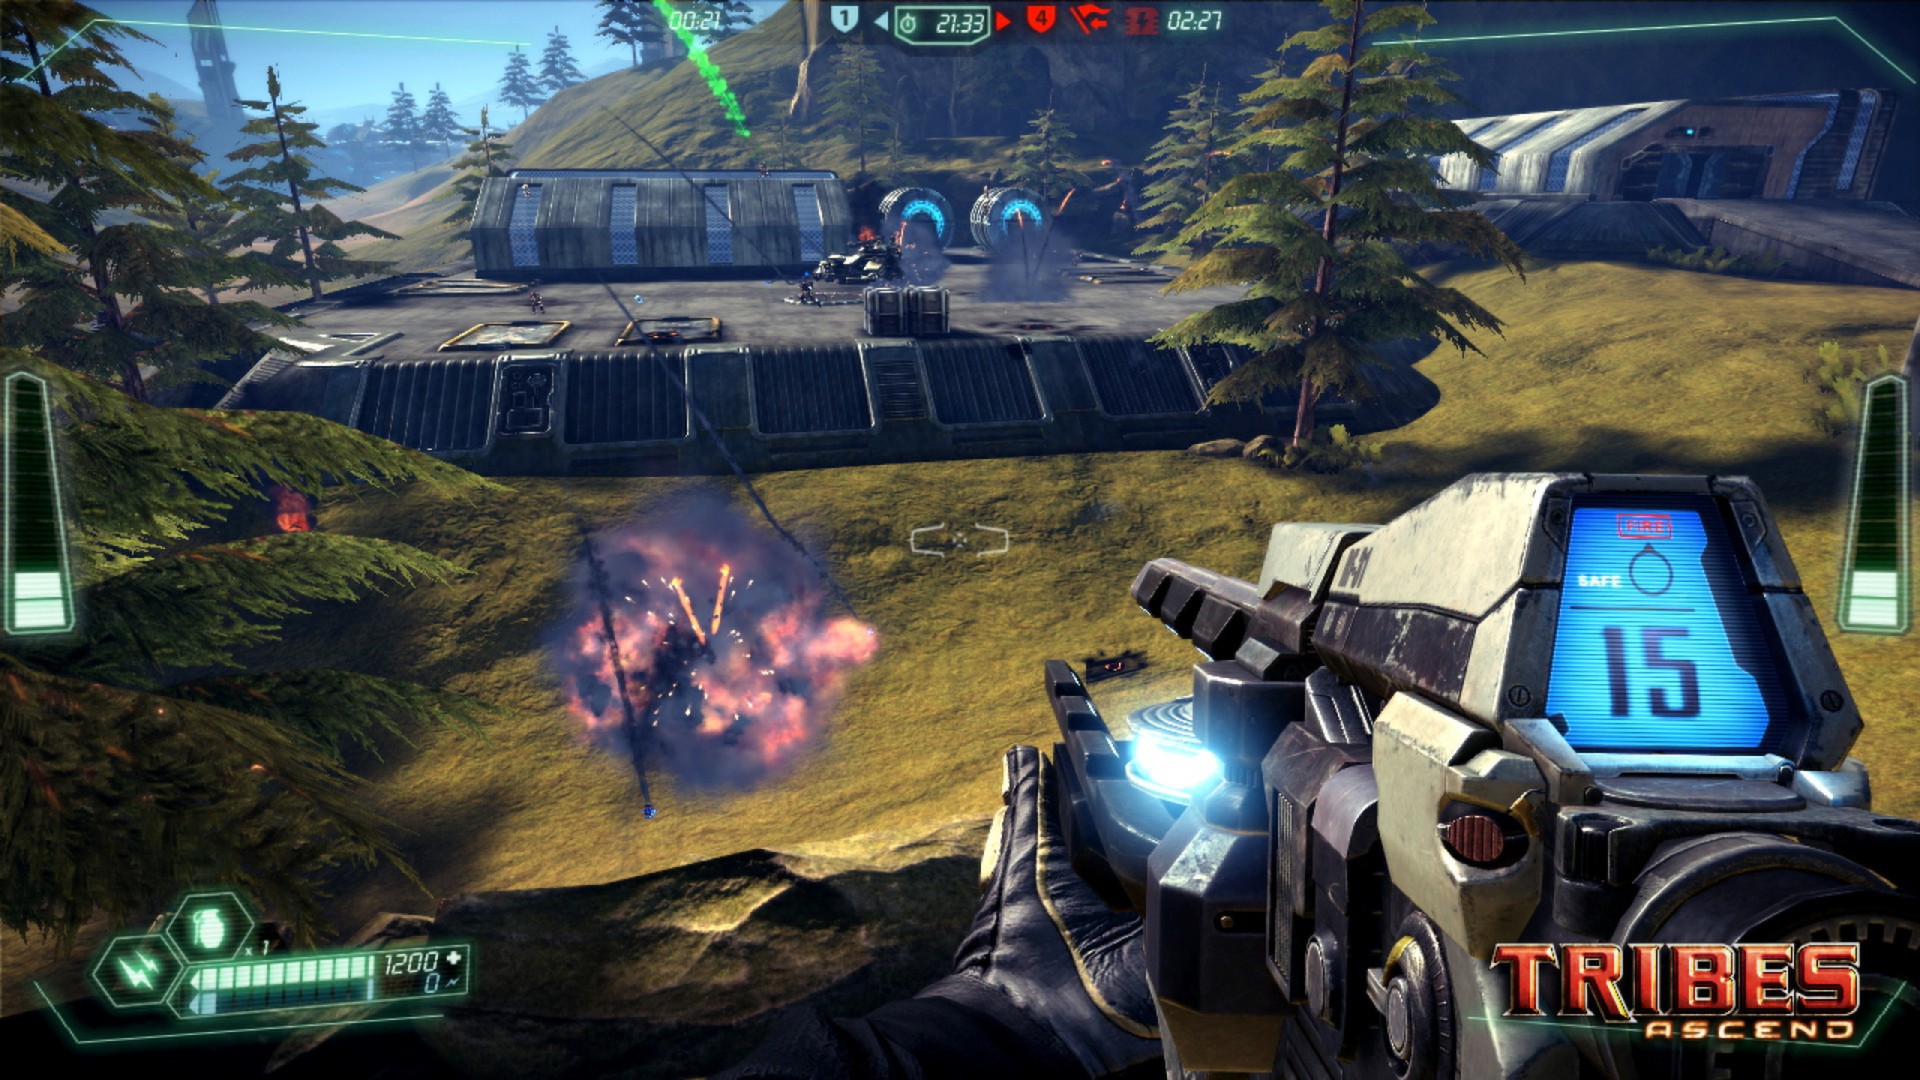 Tribes ascend